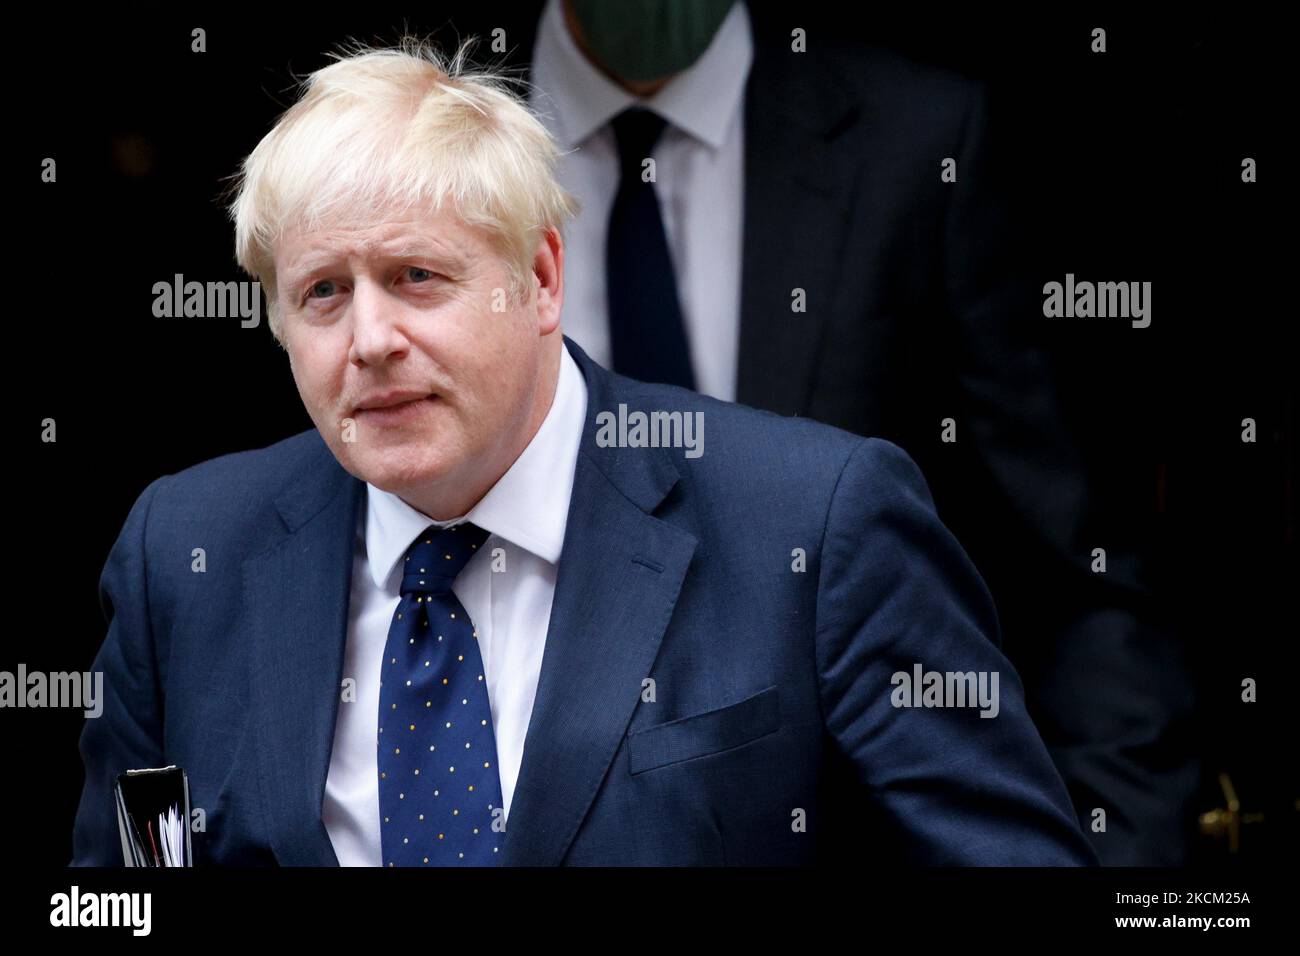 British Prime Minister Boris Johnson leaves 10 Downing Street to deliver a statement on Afghanistan to MPs in the House of Commons in London, England, on September 6, 2021. (Photo by David Cliff/NurPhoto) Stock Photo